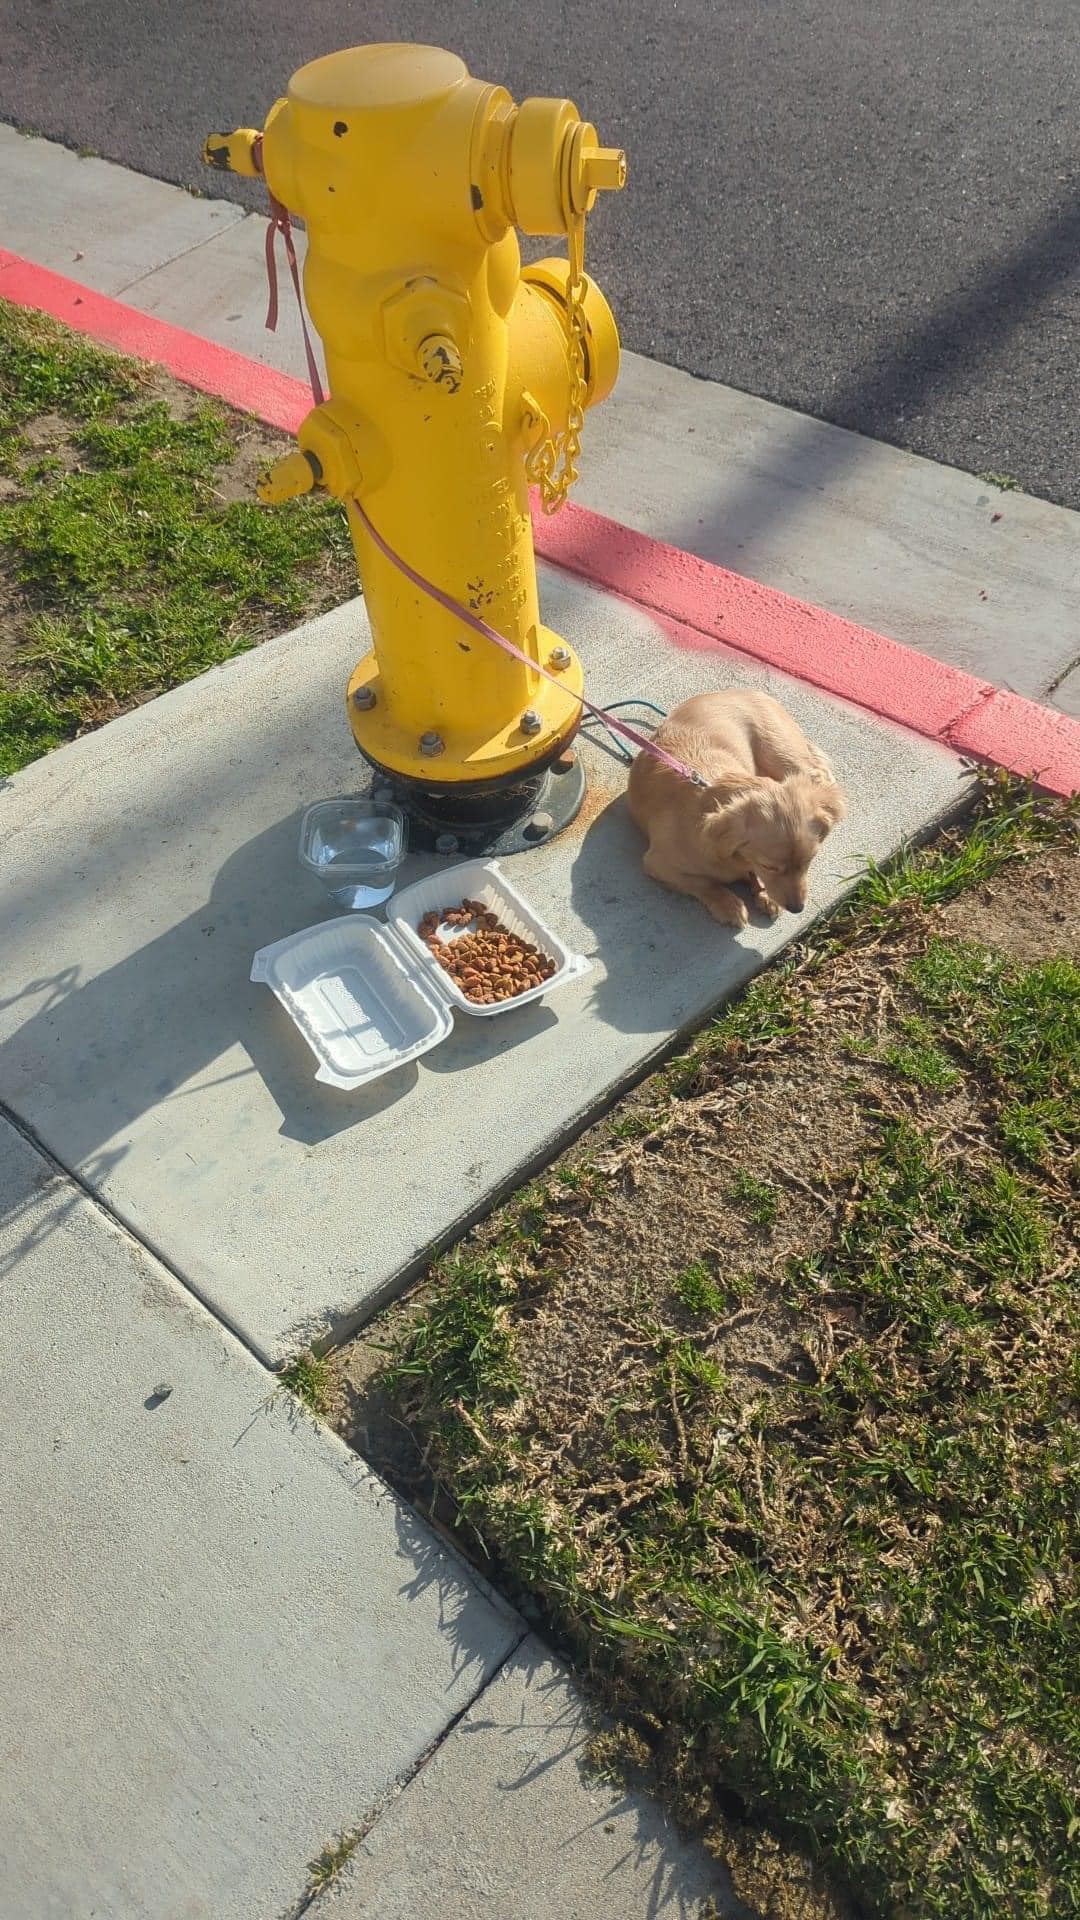 Cici the dog tied to a fire hydrant with food and water next to her.